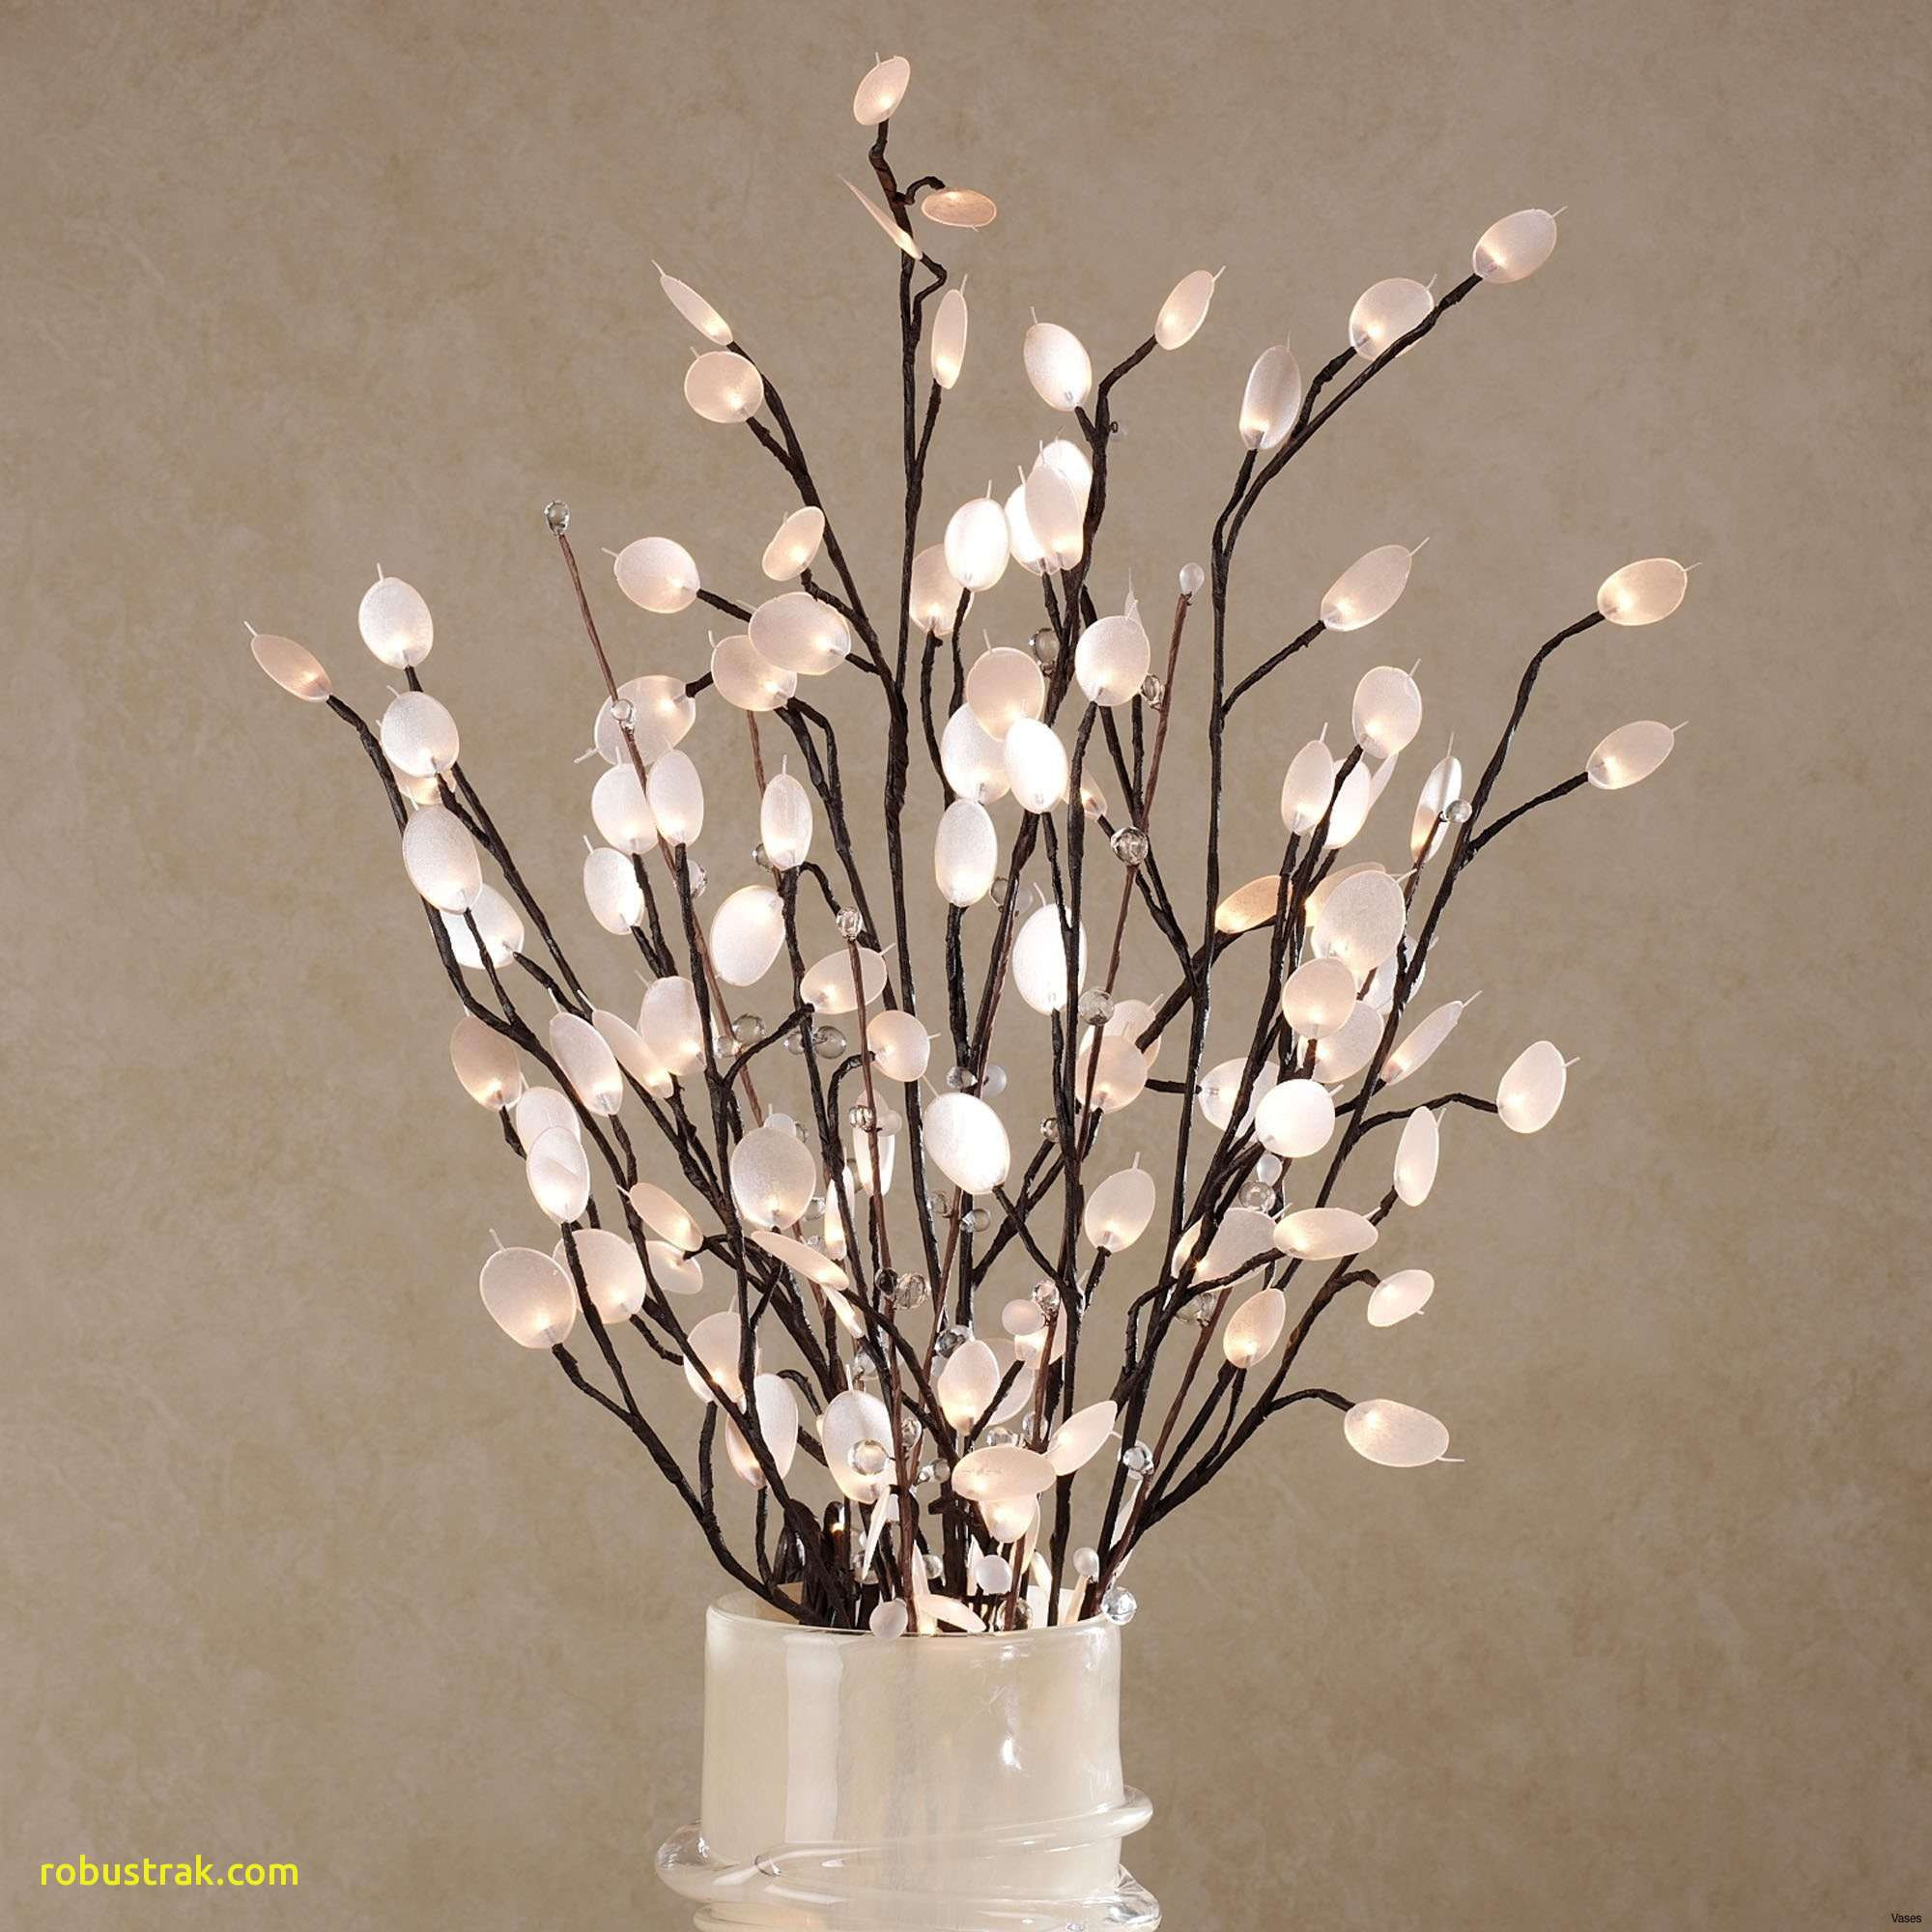 28 Great Silver Vase with Artificial Flowers 2024 free download silver vase with artificial flowers of inspirational decor sticks in a vase home design ideas regarding decorative sticks for vases vase with bamboo l bambooi 16d